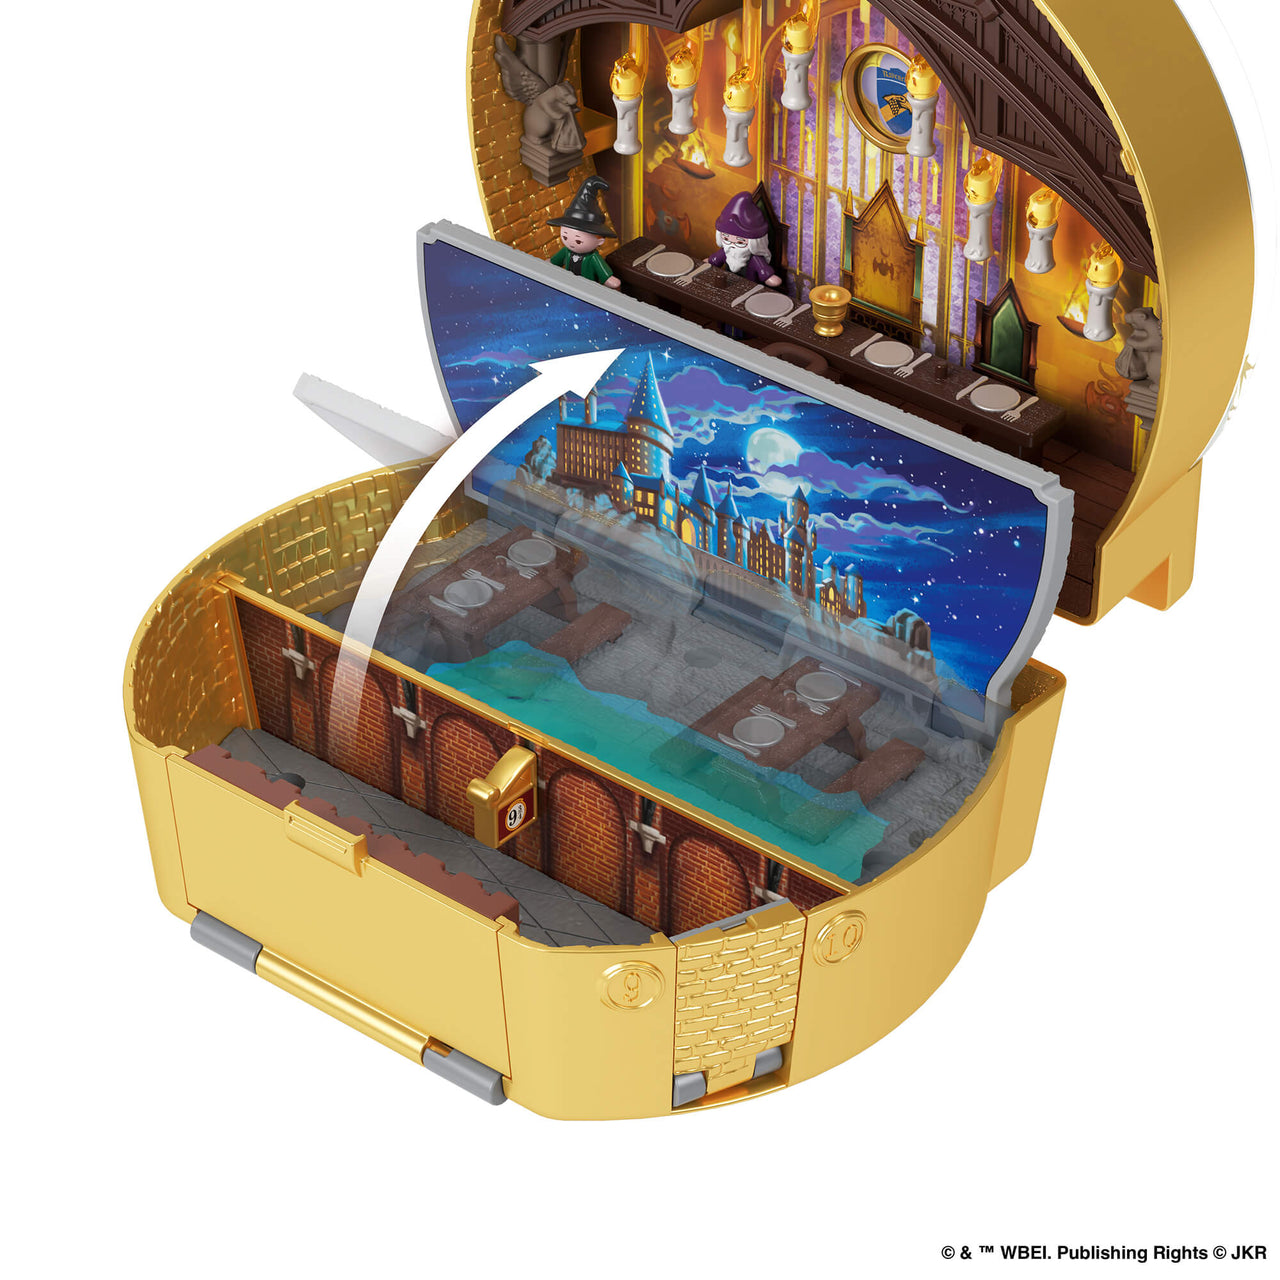 Polly Pocket Harry Potter Collectors Compact Polly Pocket